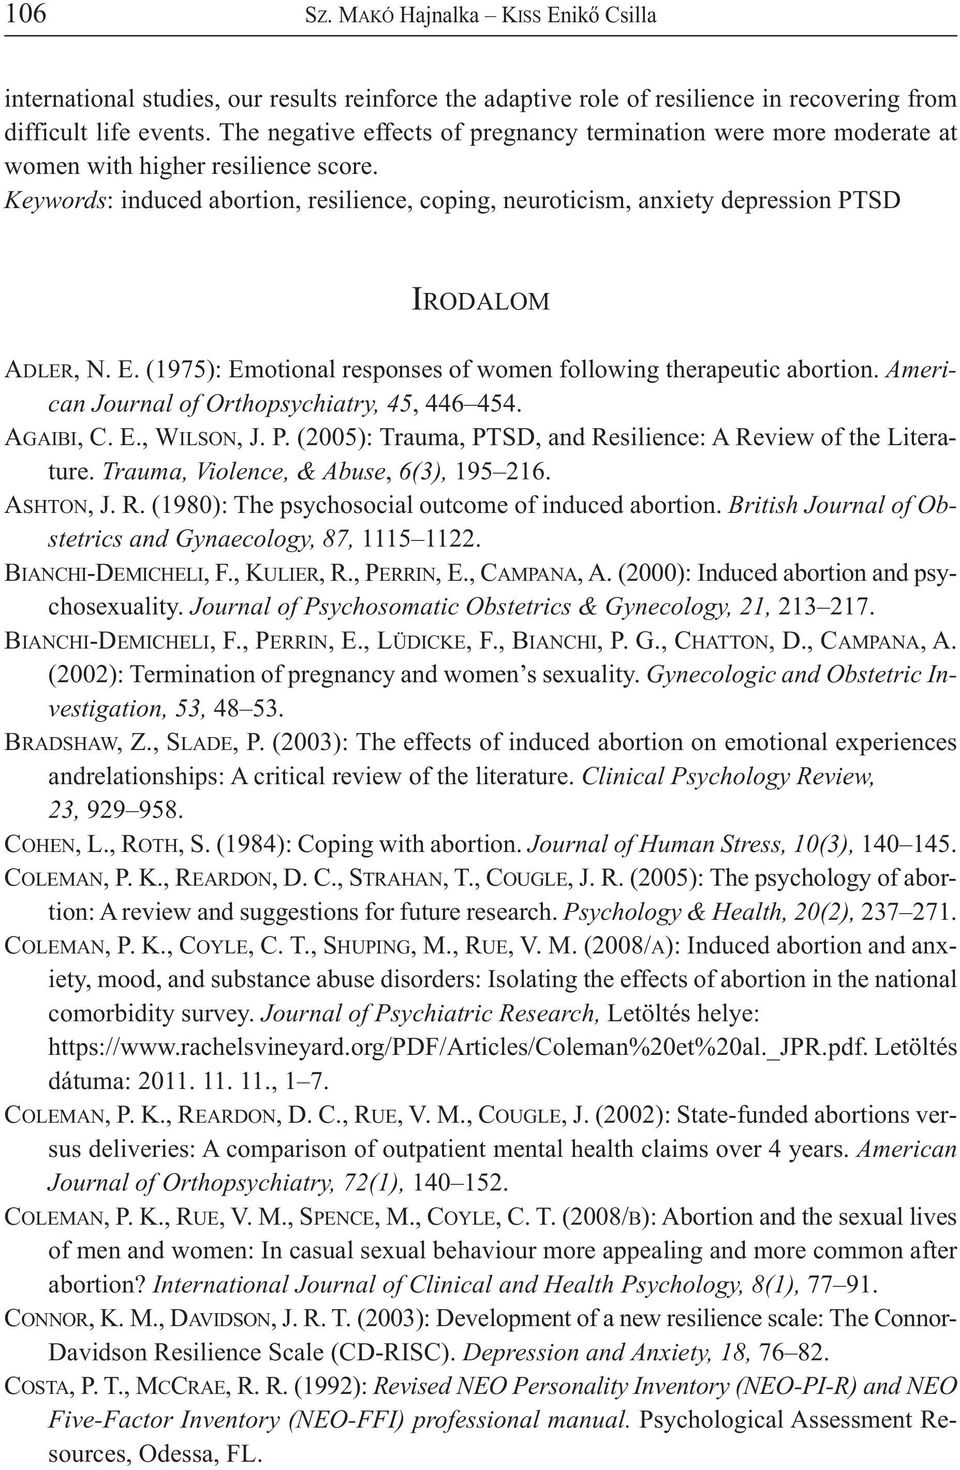 Keywords: induced abortion, resilience, coping, neuroticism, anxiety depression PTSD IRODALOM ADLER, N. E. (1975): Emotional responses of women following therapeutic abortion.